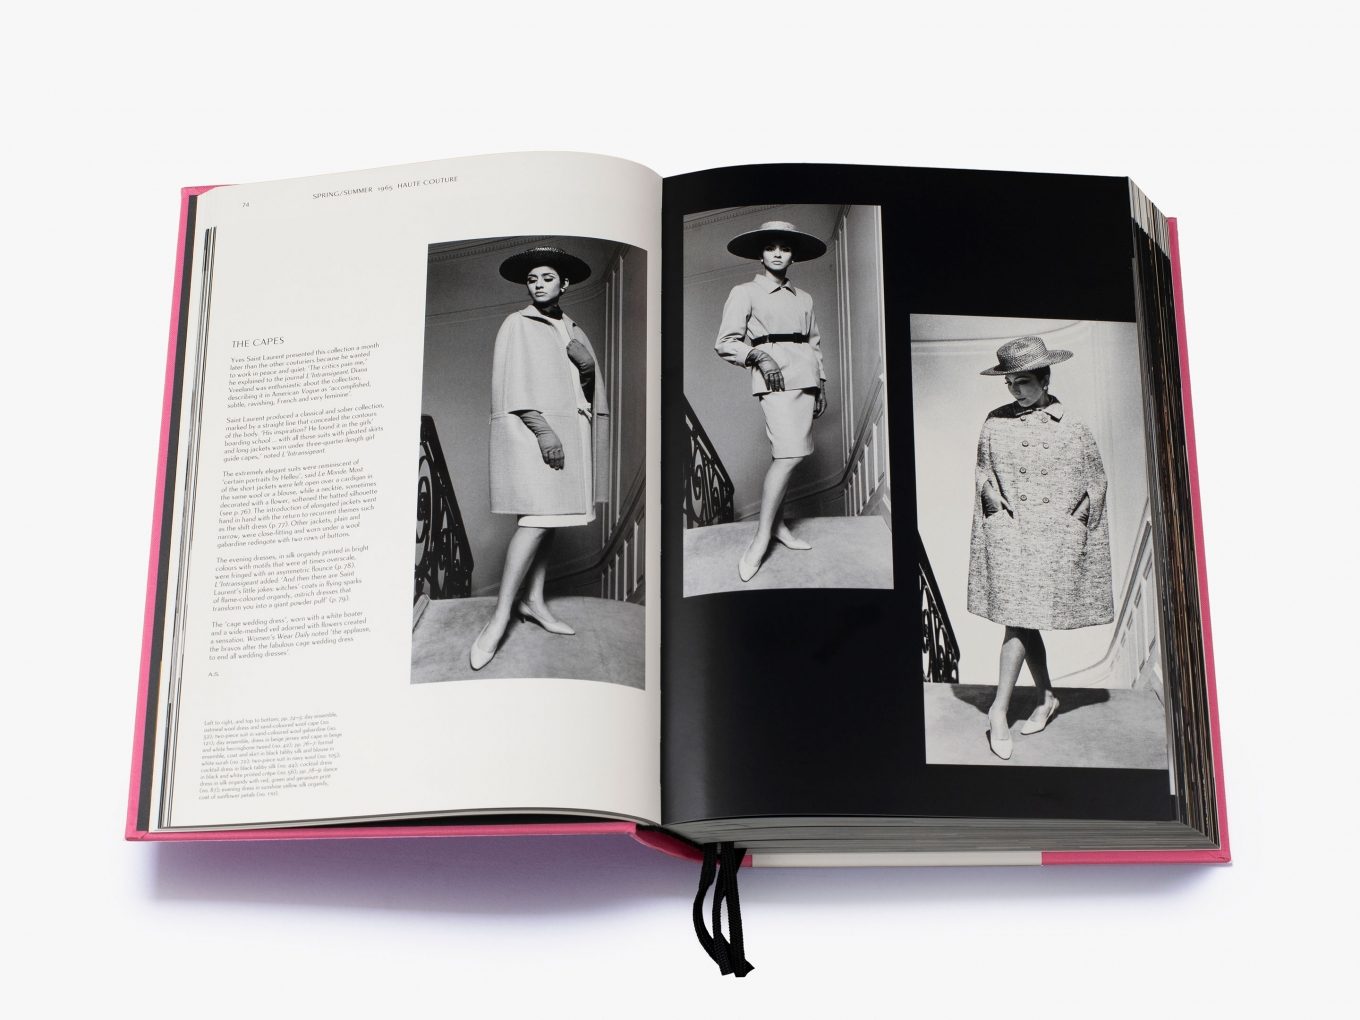 Yves Saint Laurent: Catwalk - Thames and Hudson - Coffee Table Book at The  Nowhere Nation